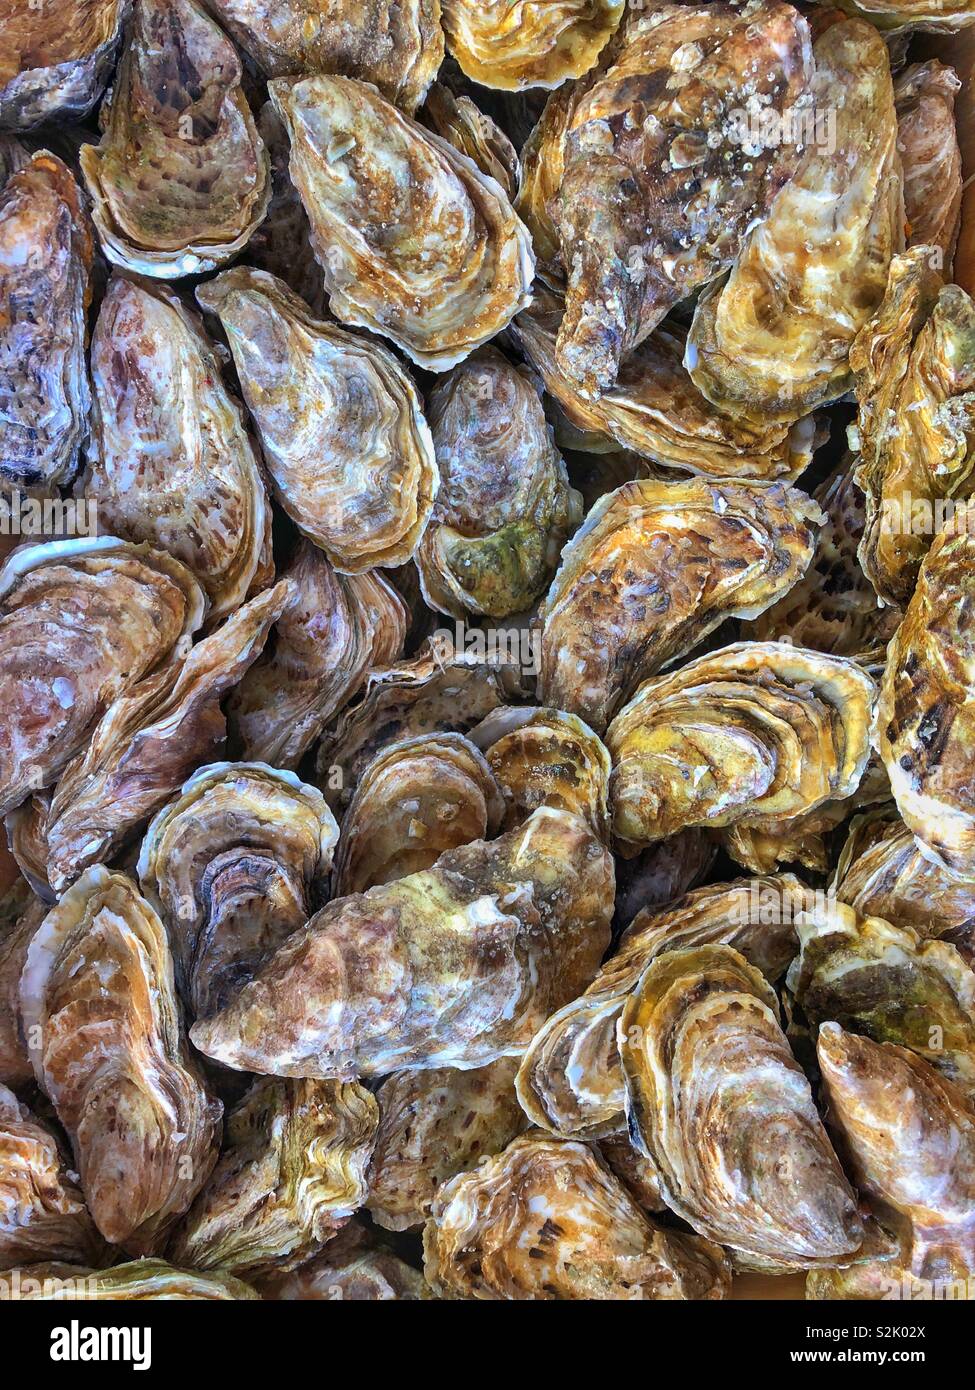 Fresh live oysters for sale in a french fishmongers Stock Photo